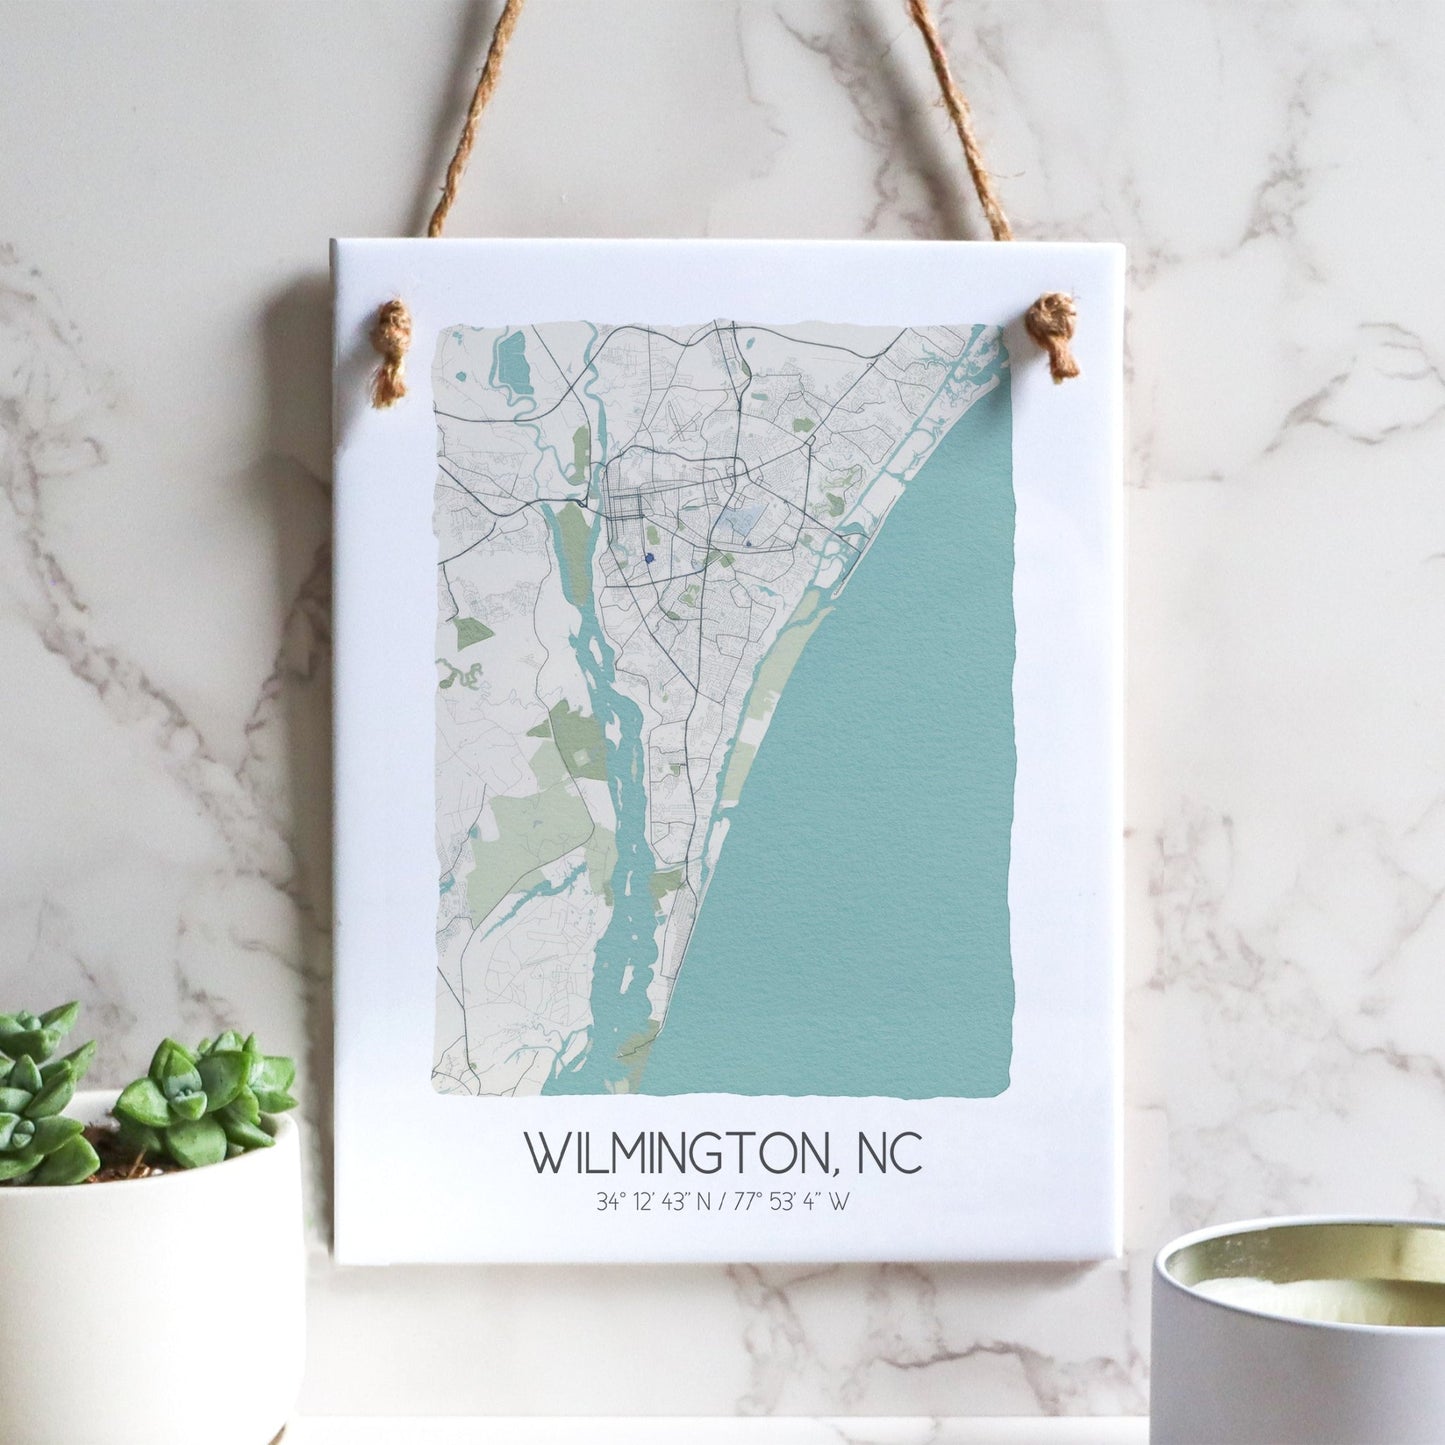 A Wilmington NC city map on a ceramic rectangle tile sign hanging on a wall, in beige